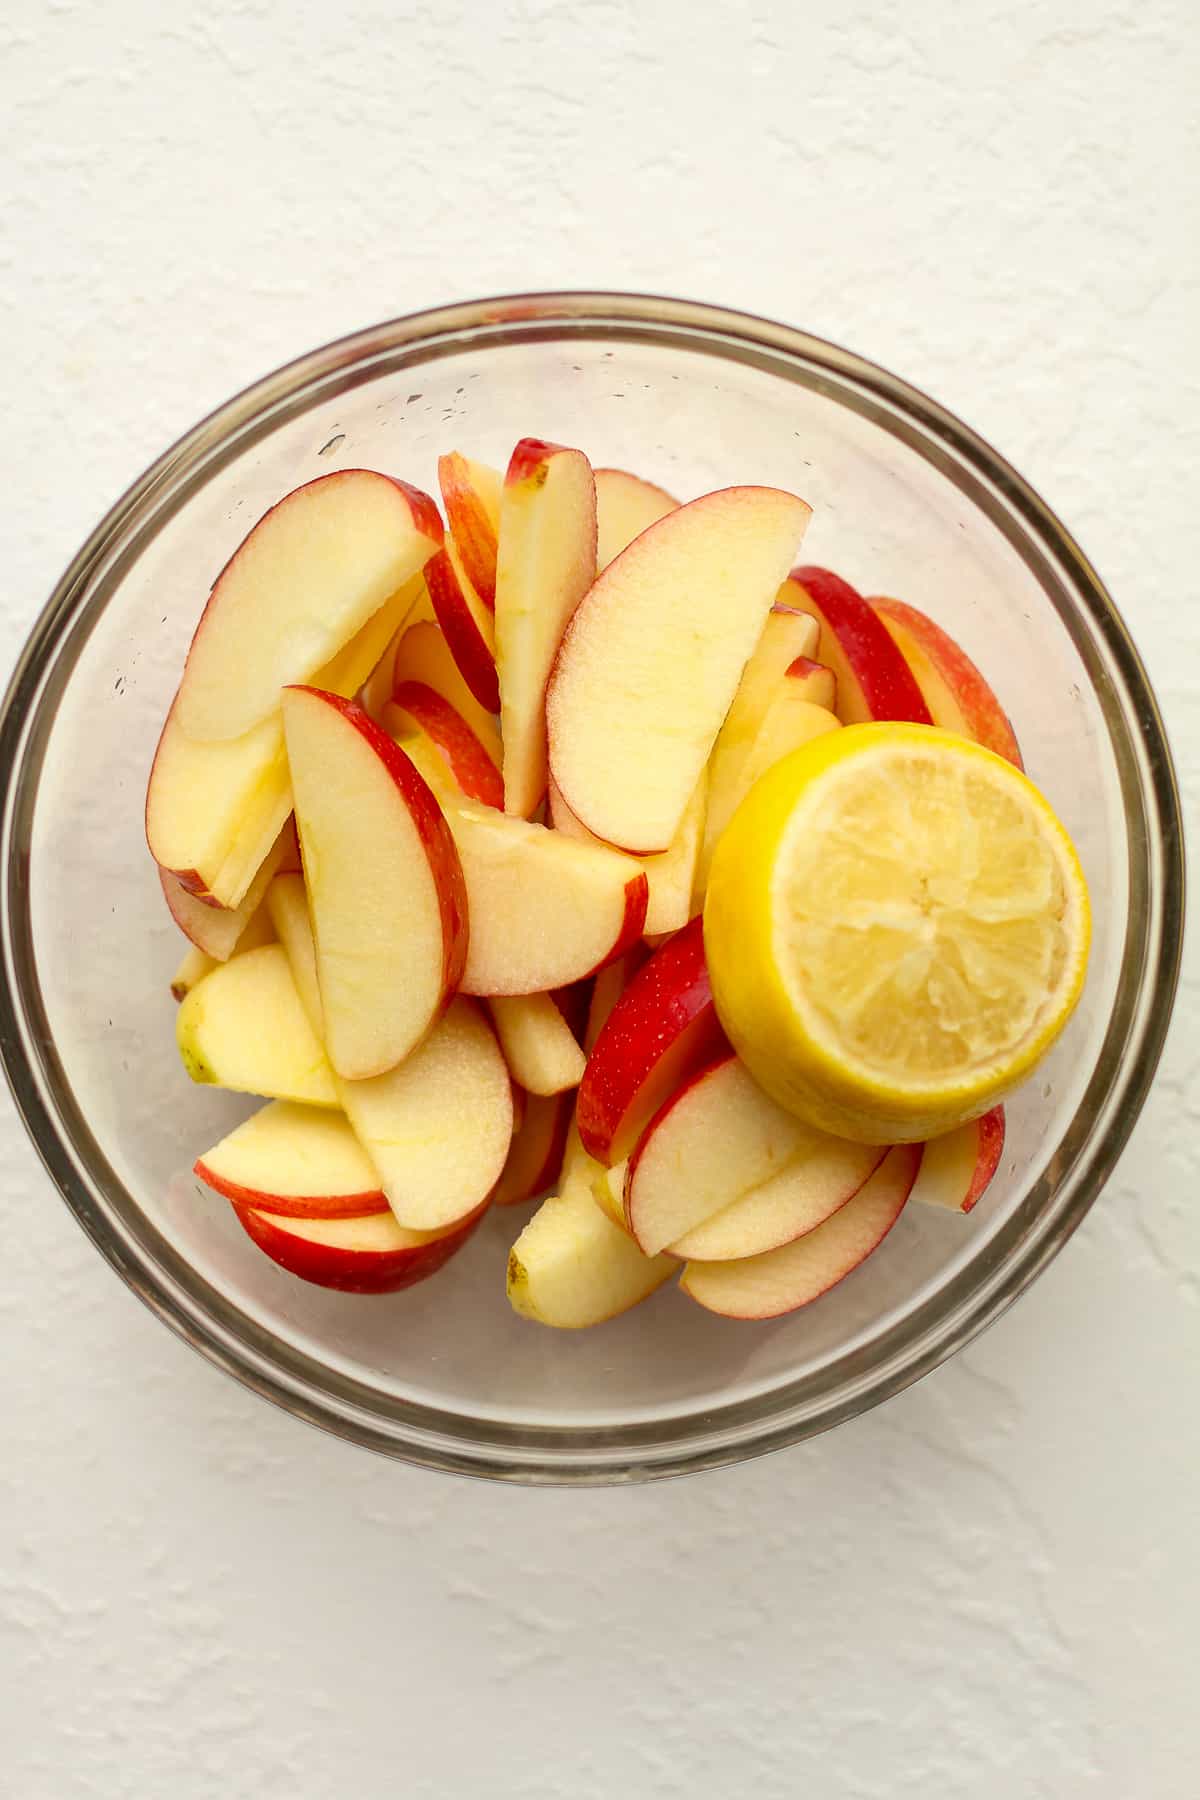 A glass bowl of the apple slices with a half of a lemon on top.